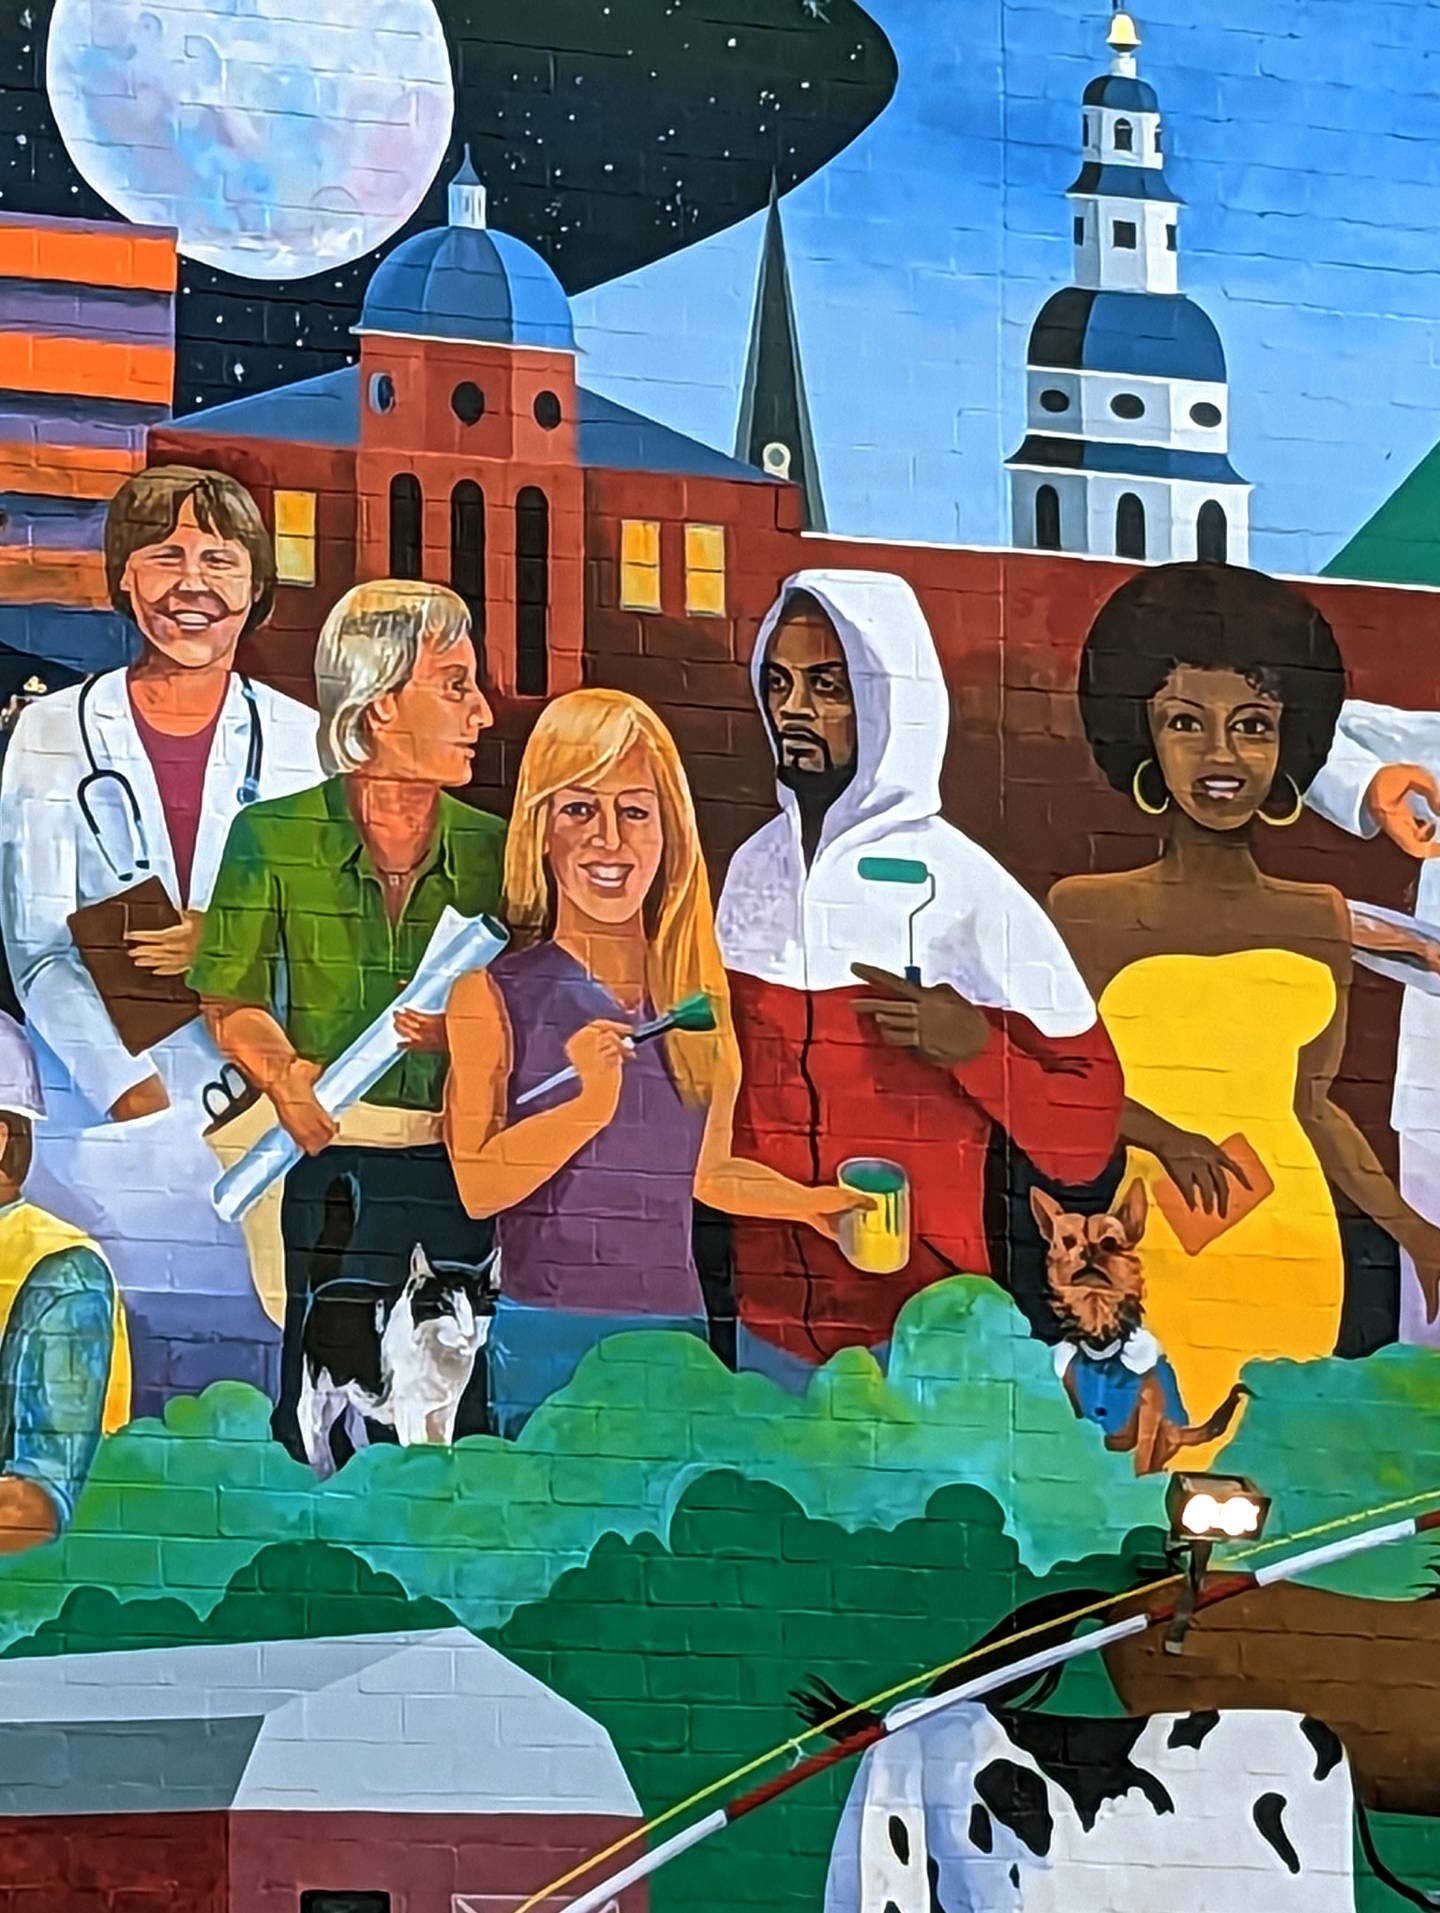 "The Best Place for All" on the side of the Arundel Center at 44 Calvert St. in Annapolis includes a self-portrait of the artists, Cindy Fletcher Holden and Comacell Brown.